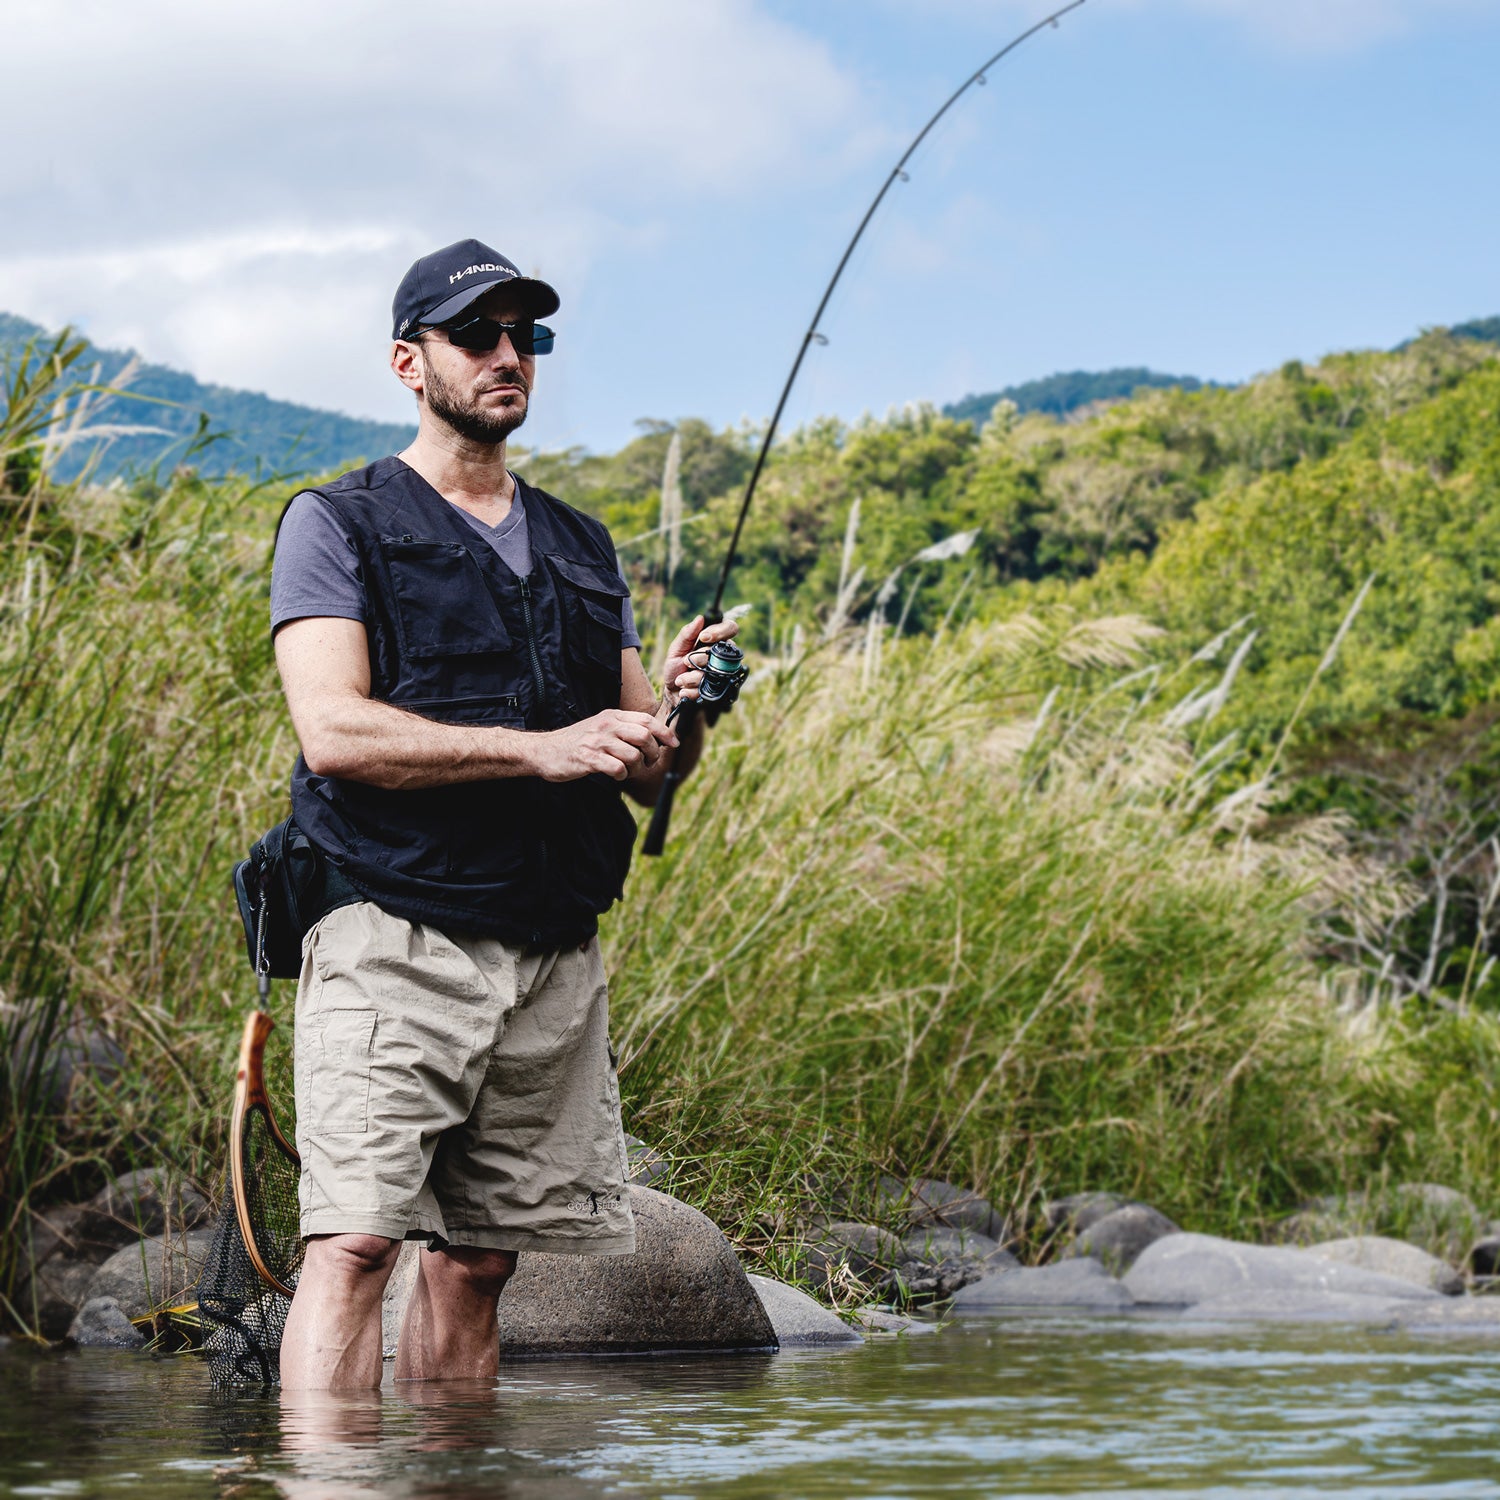 HANDING M1 BFS spinning fishing rod provides all day comfort